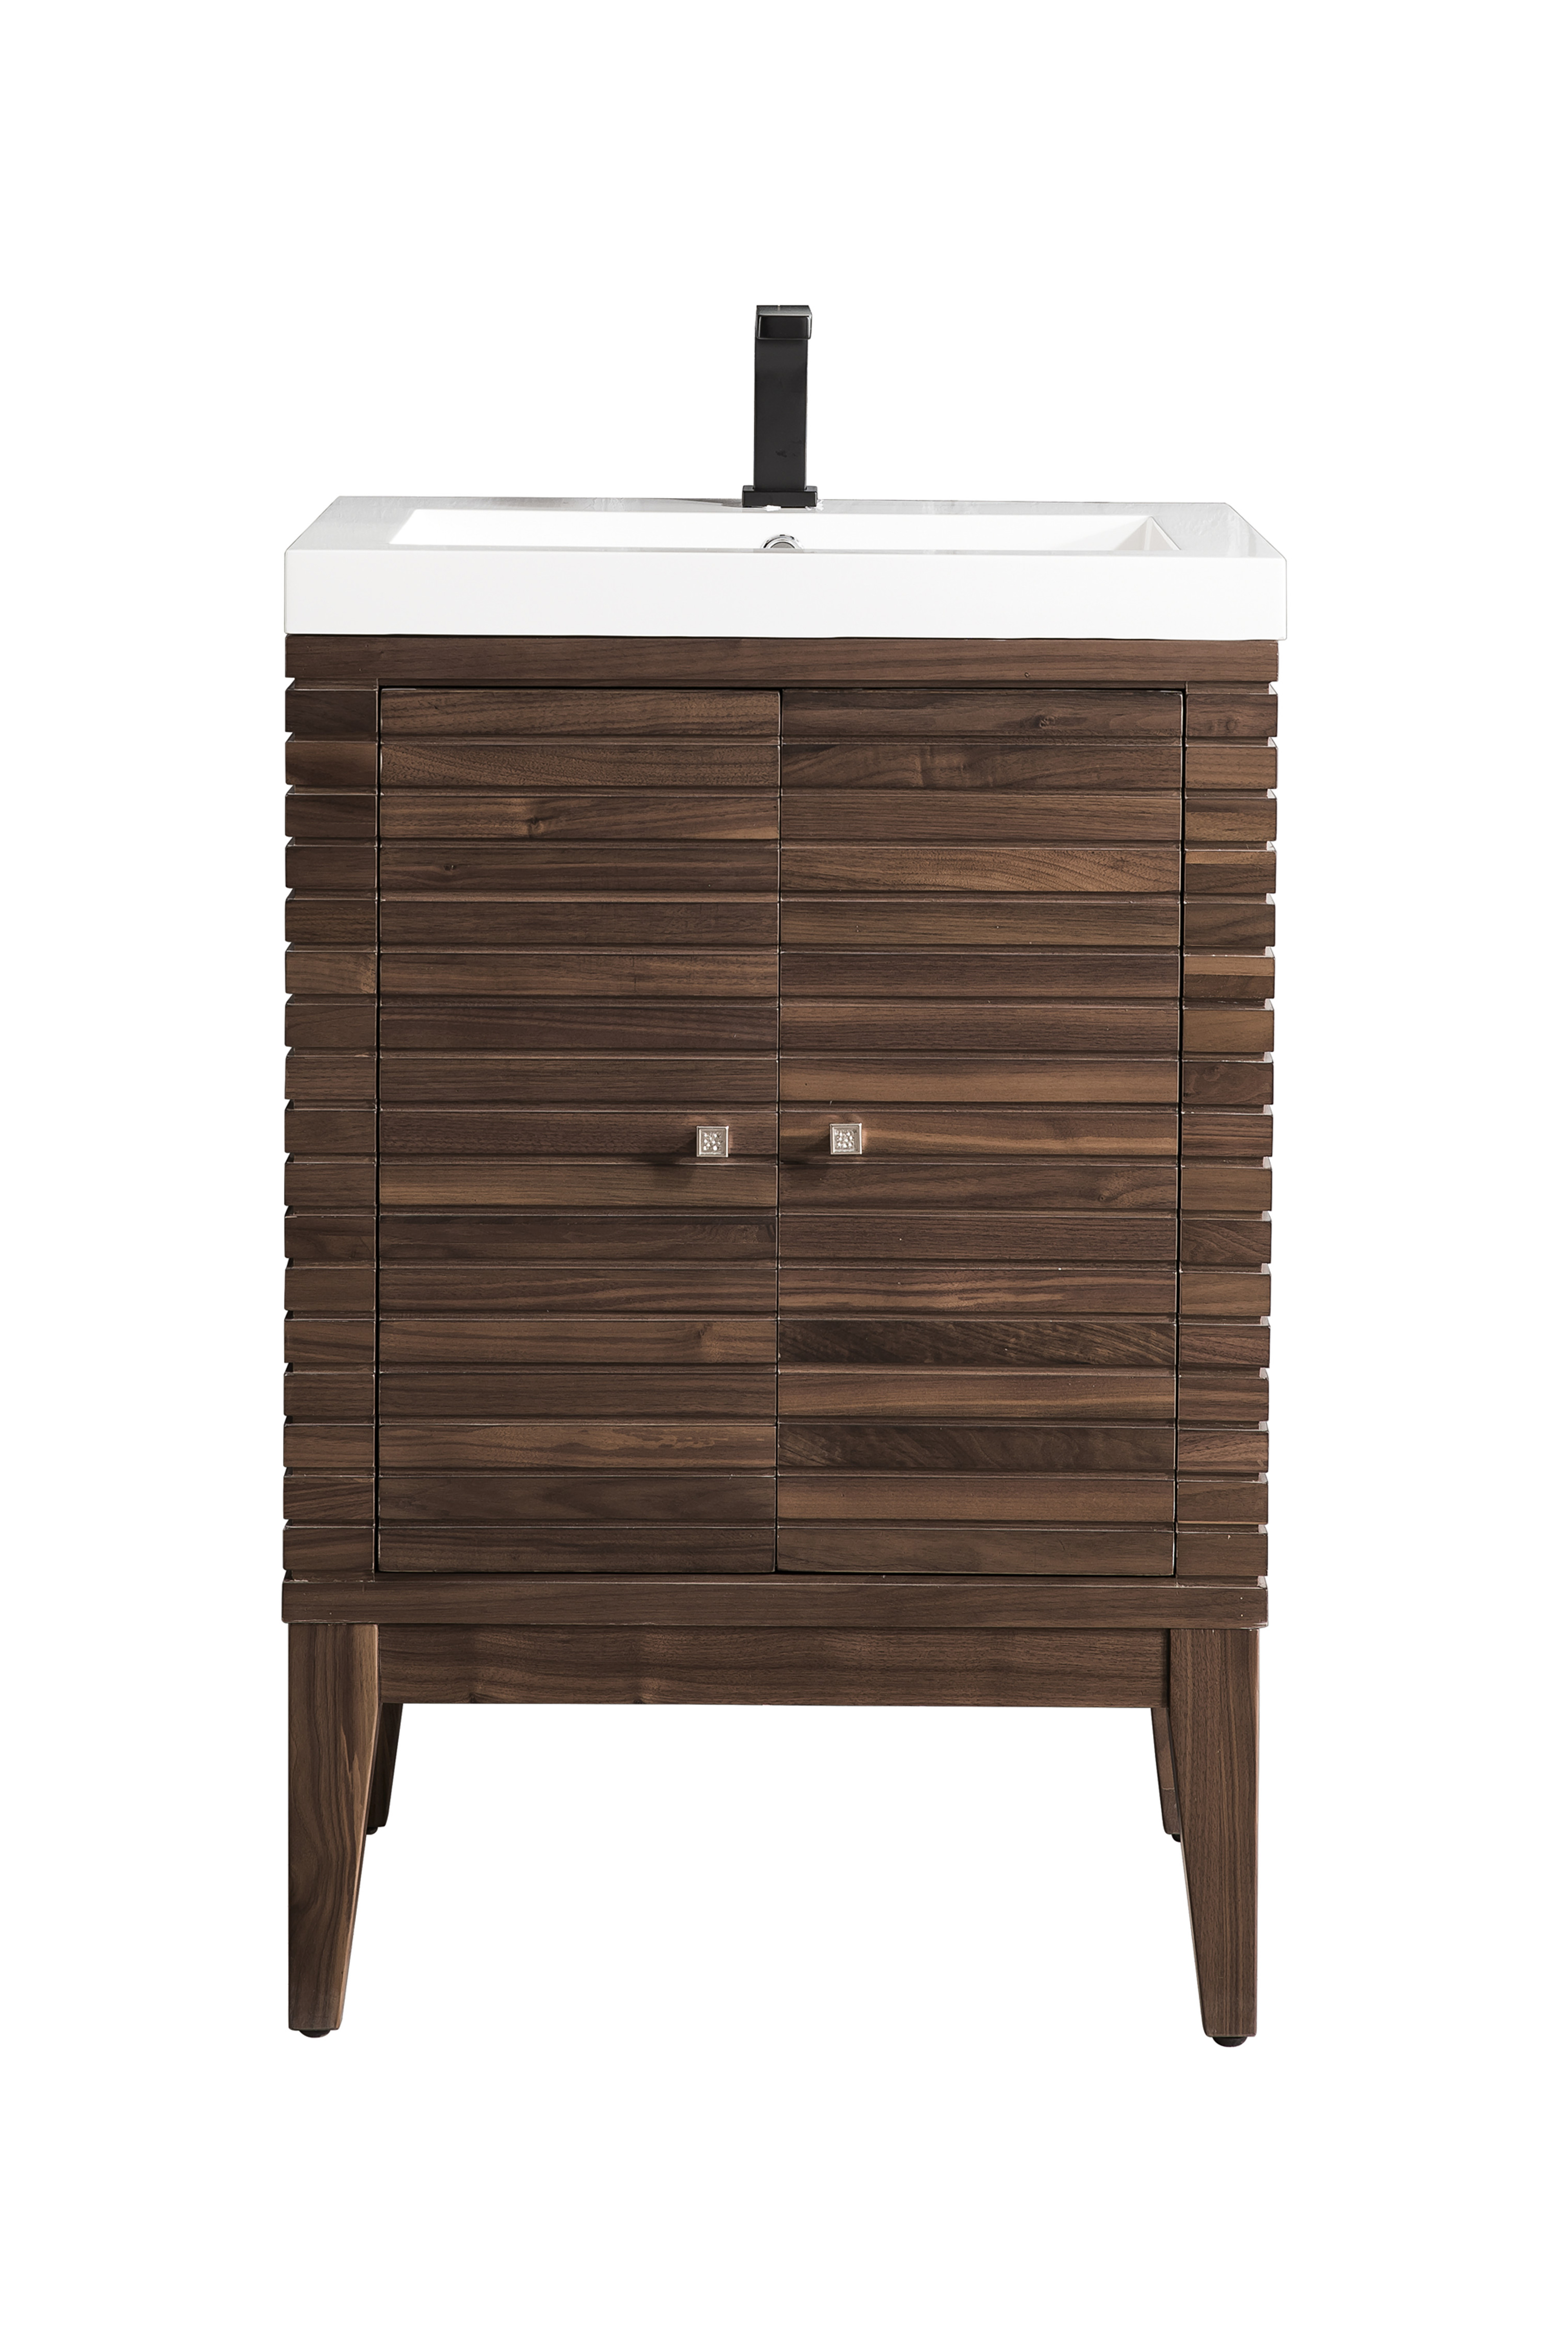 James Martin E213V24WLTWG Linden 24" Single Vanity Cabinet, Mid Century Walnut w/ White Glossy Composite Countertop